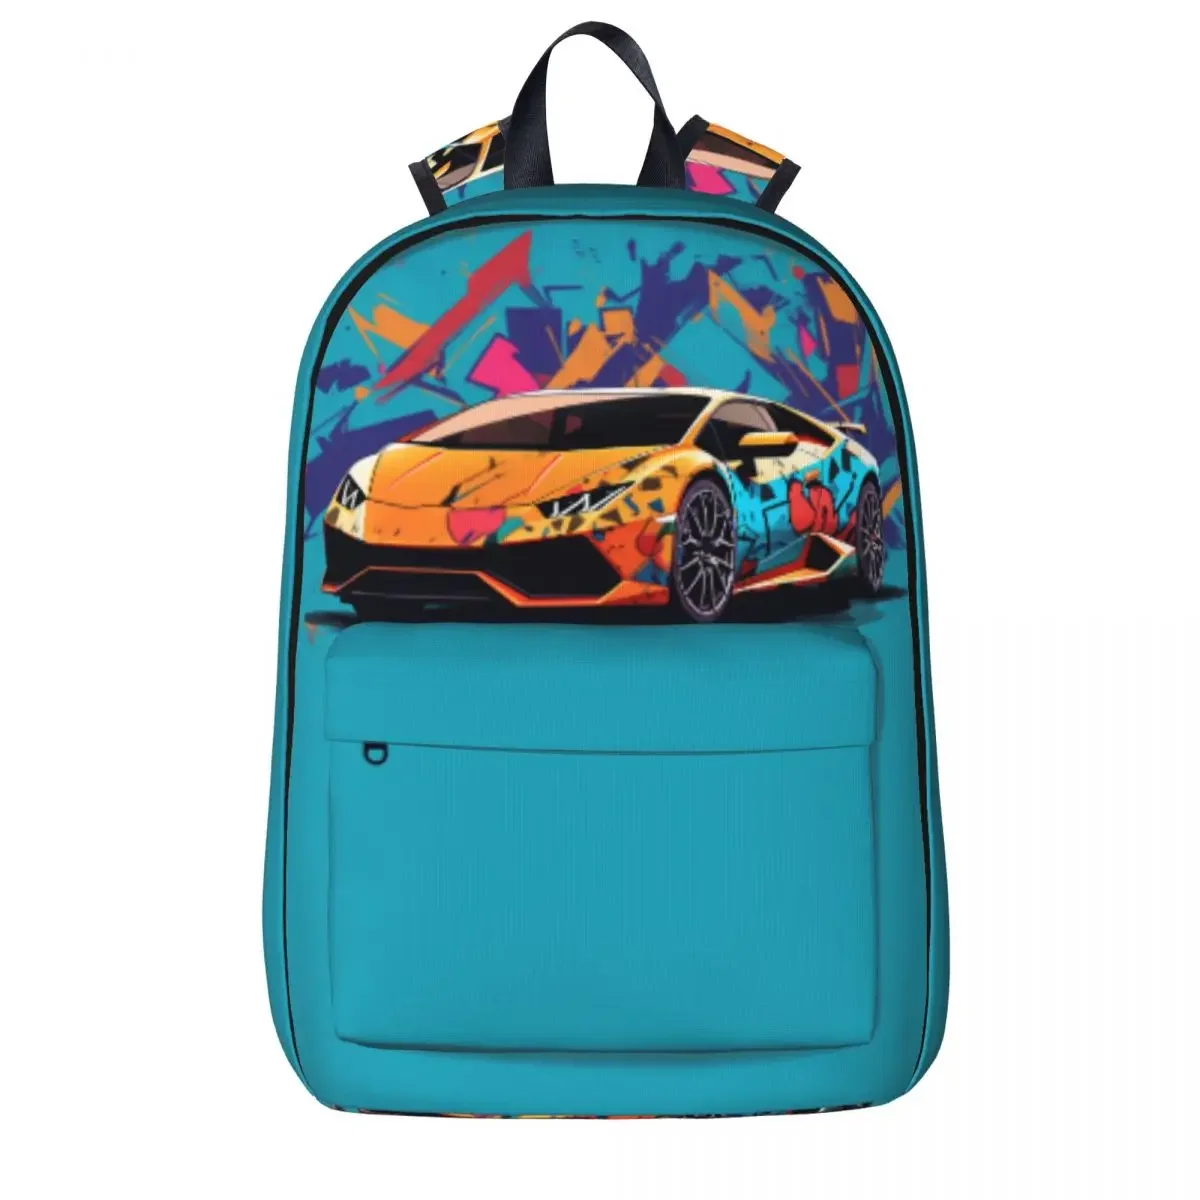 

Noble Sports Car Backpack Graffiti Simplified Form Teen Polyester Camping Backpacks Big Pretty High School Bags Rucksack